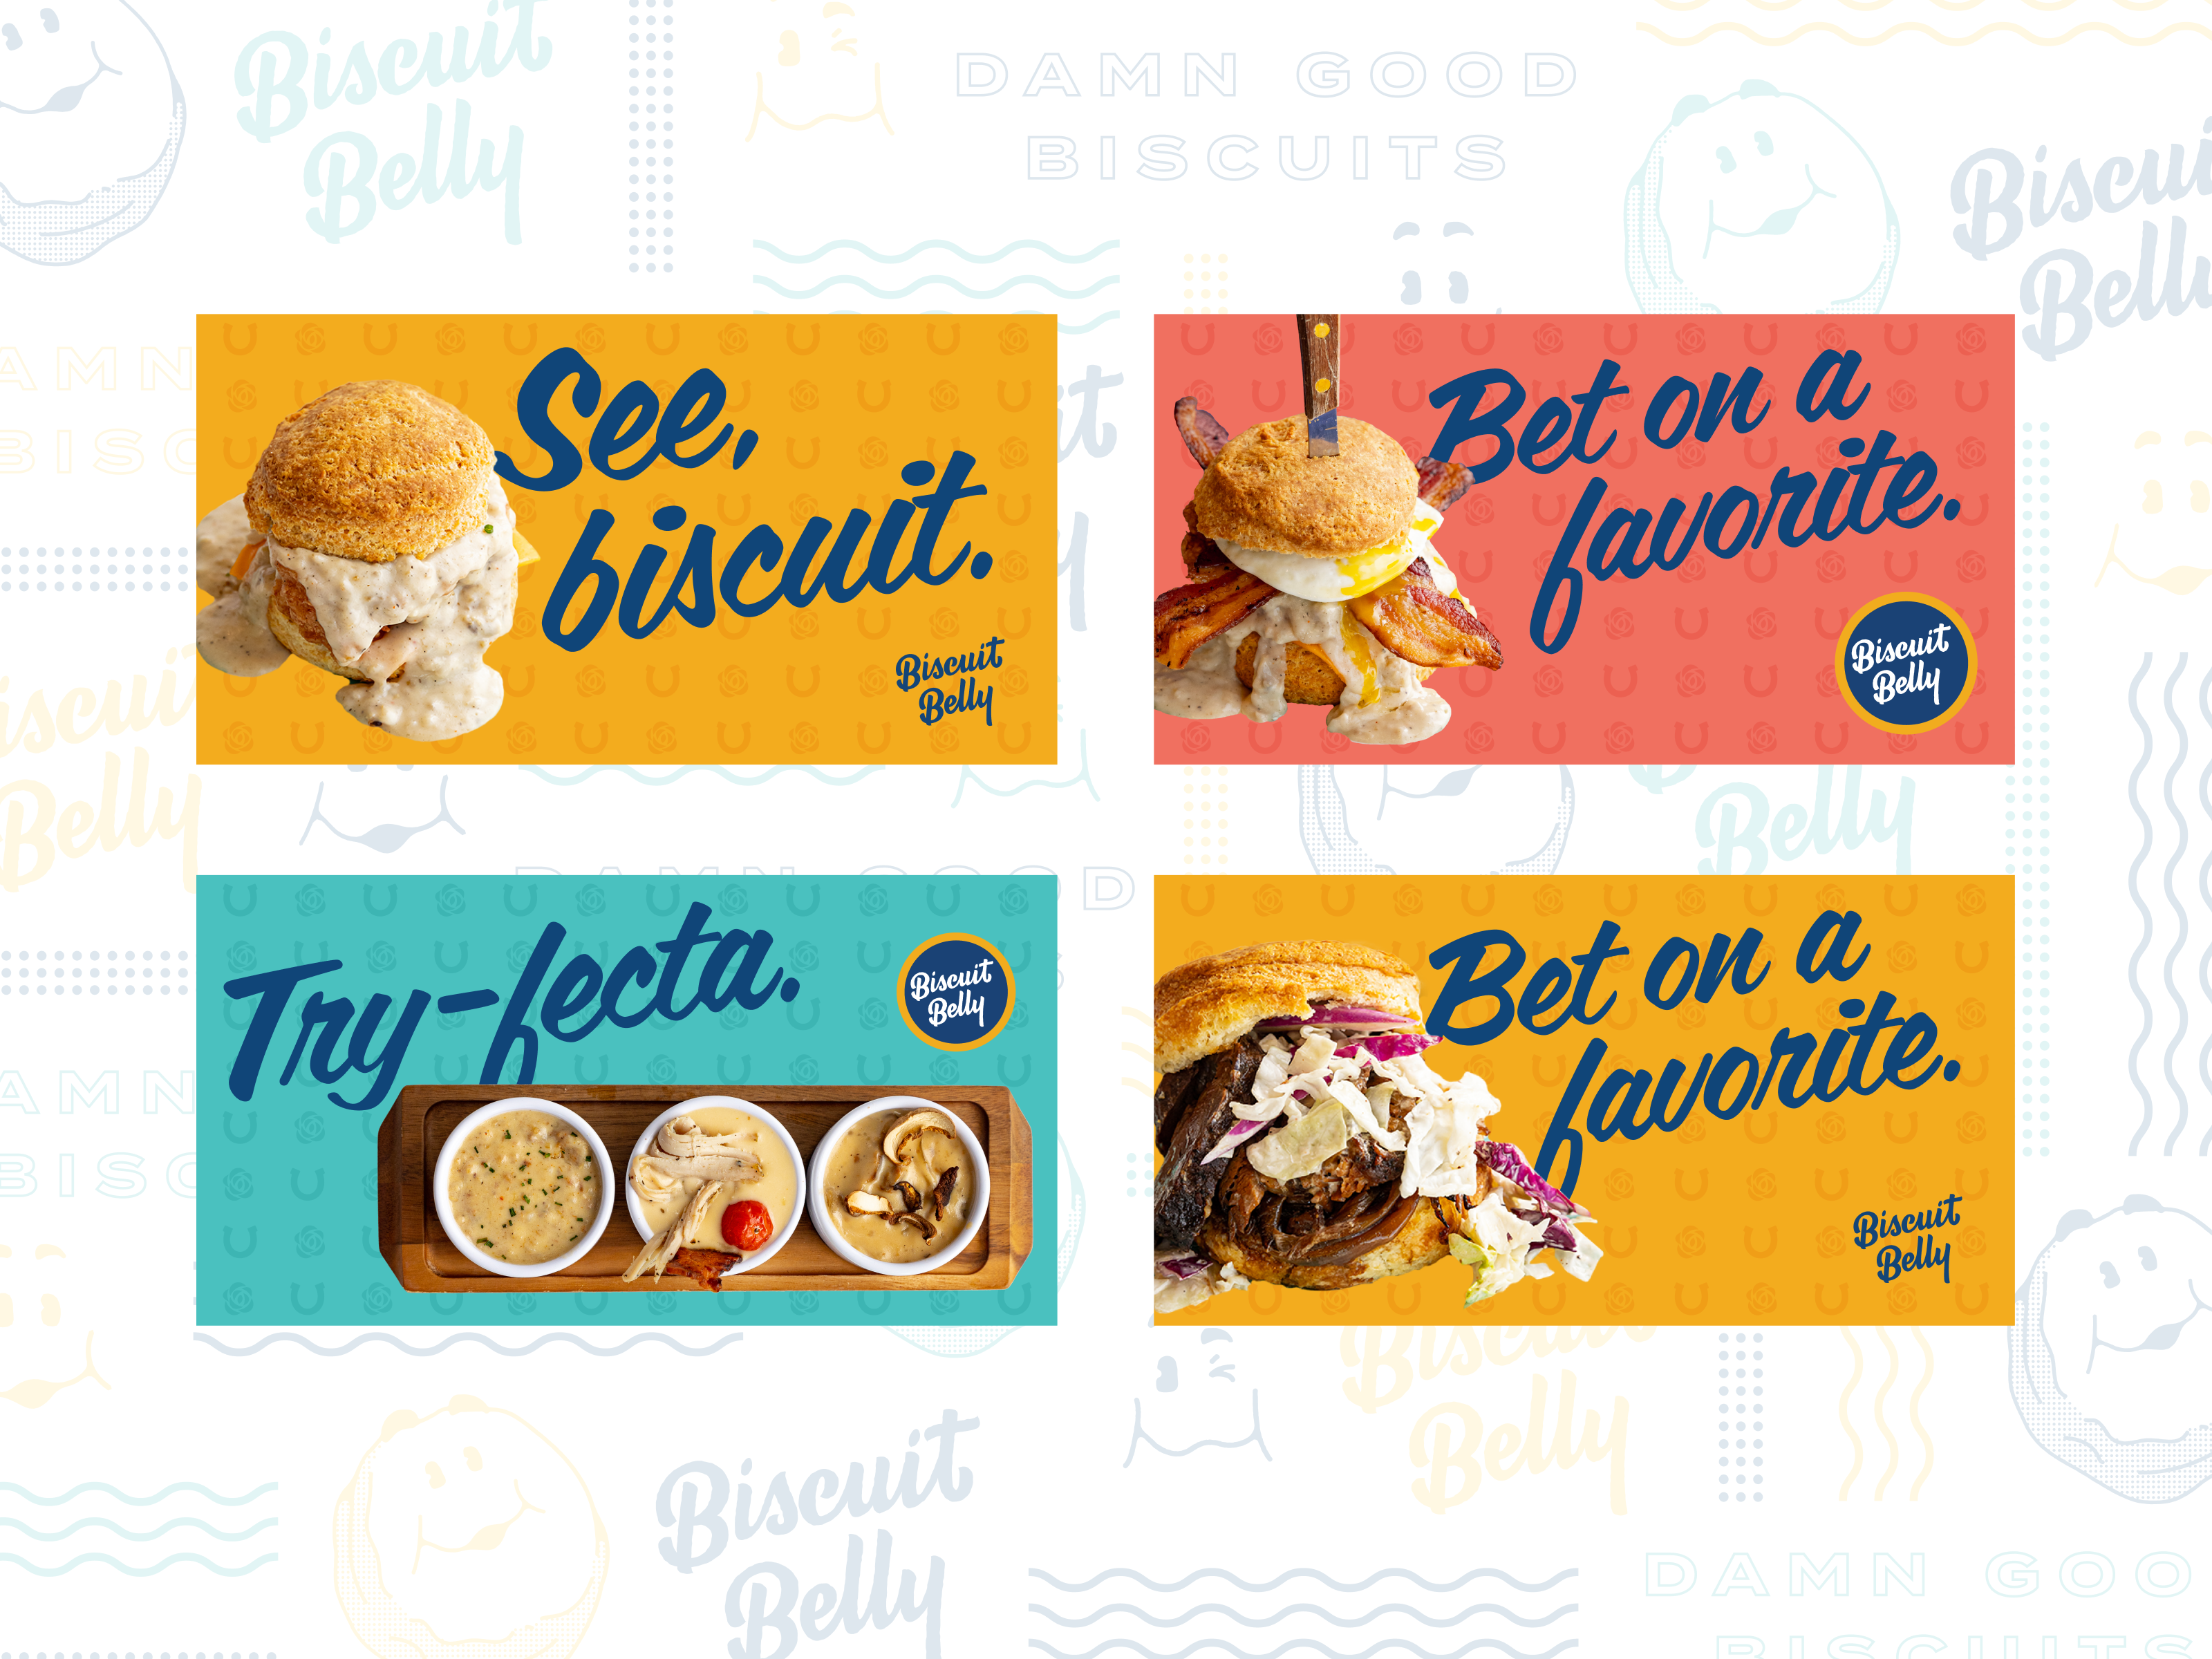 Showing a series of Biscuit Belly ads for Kentucky Derby.